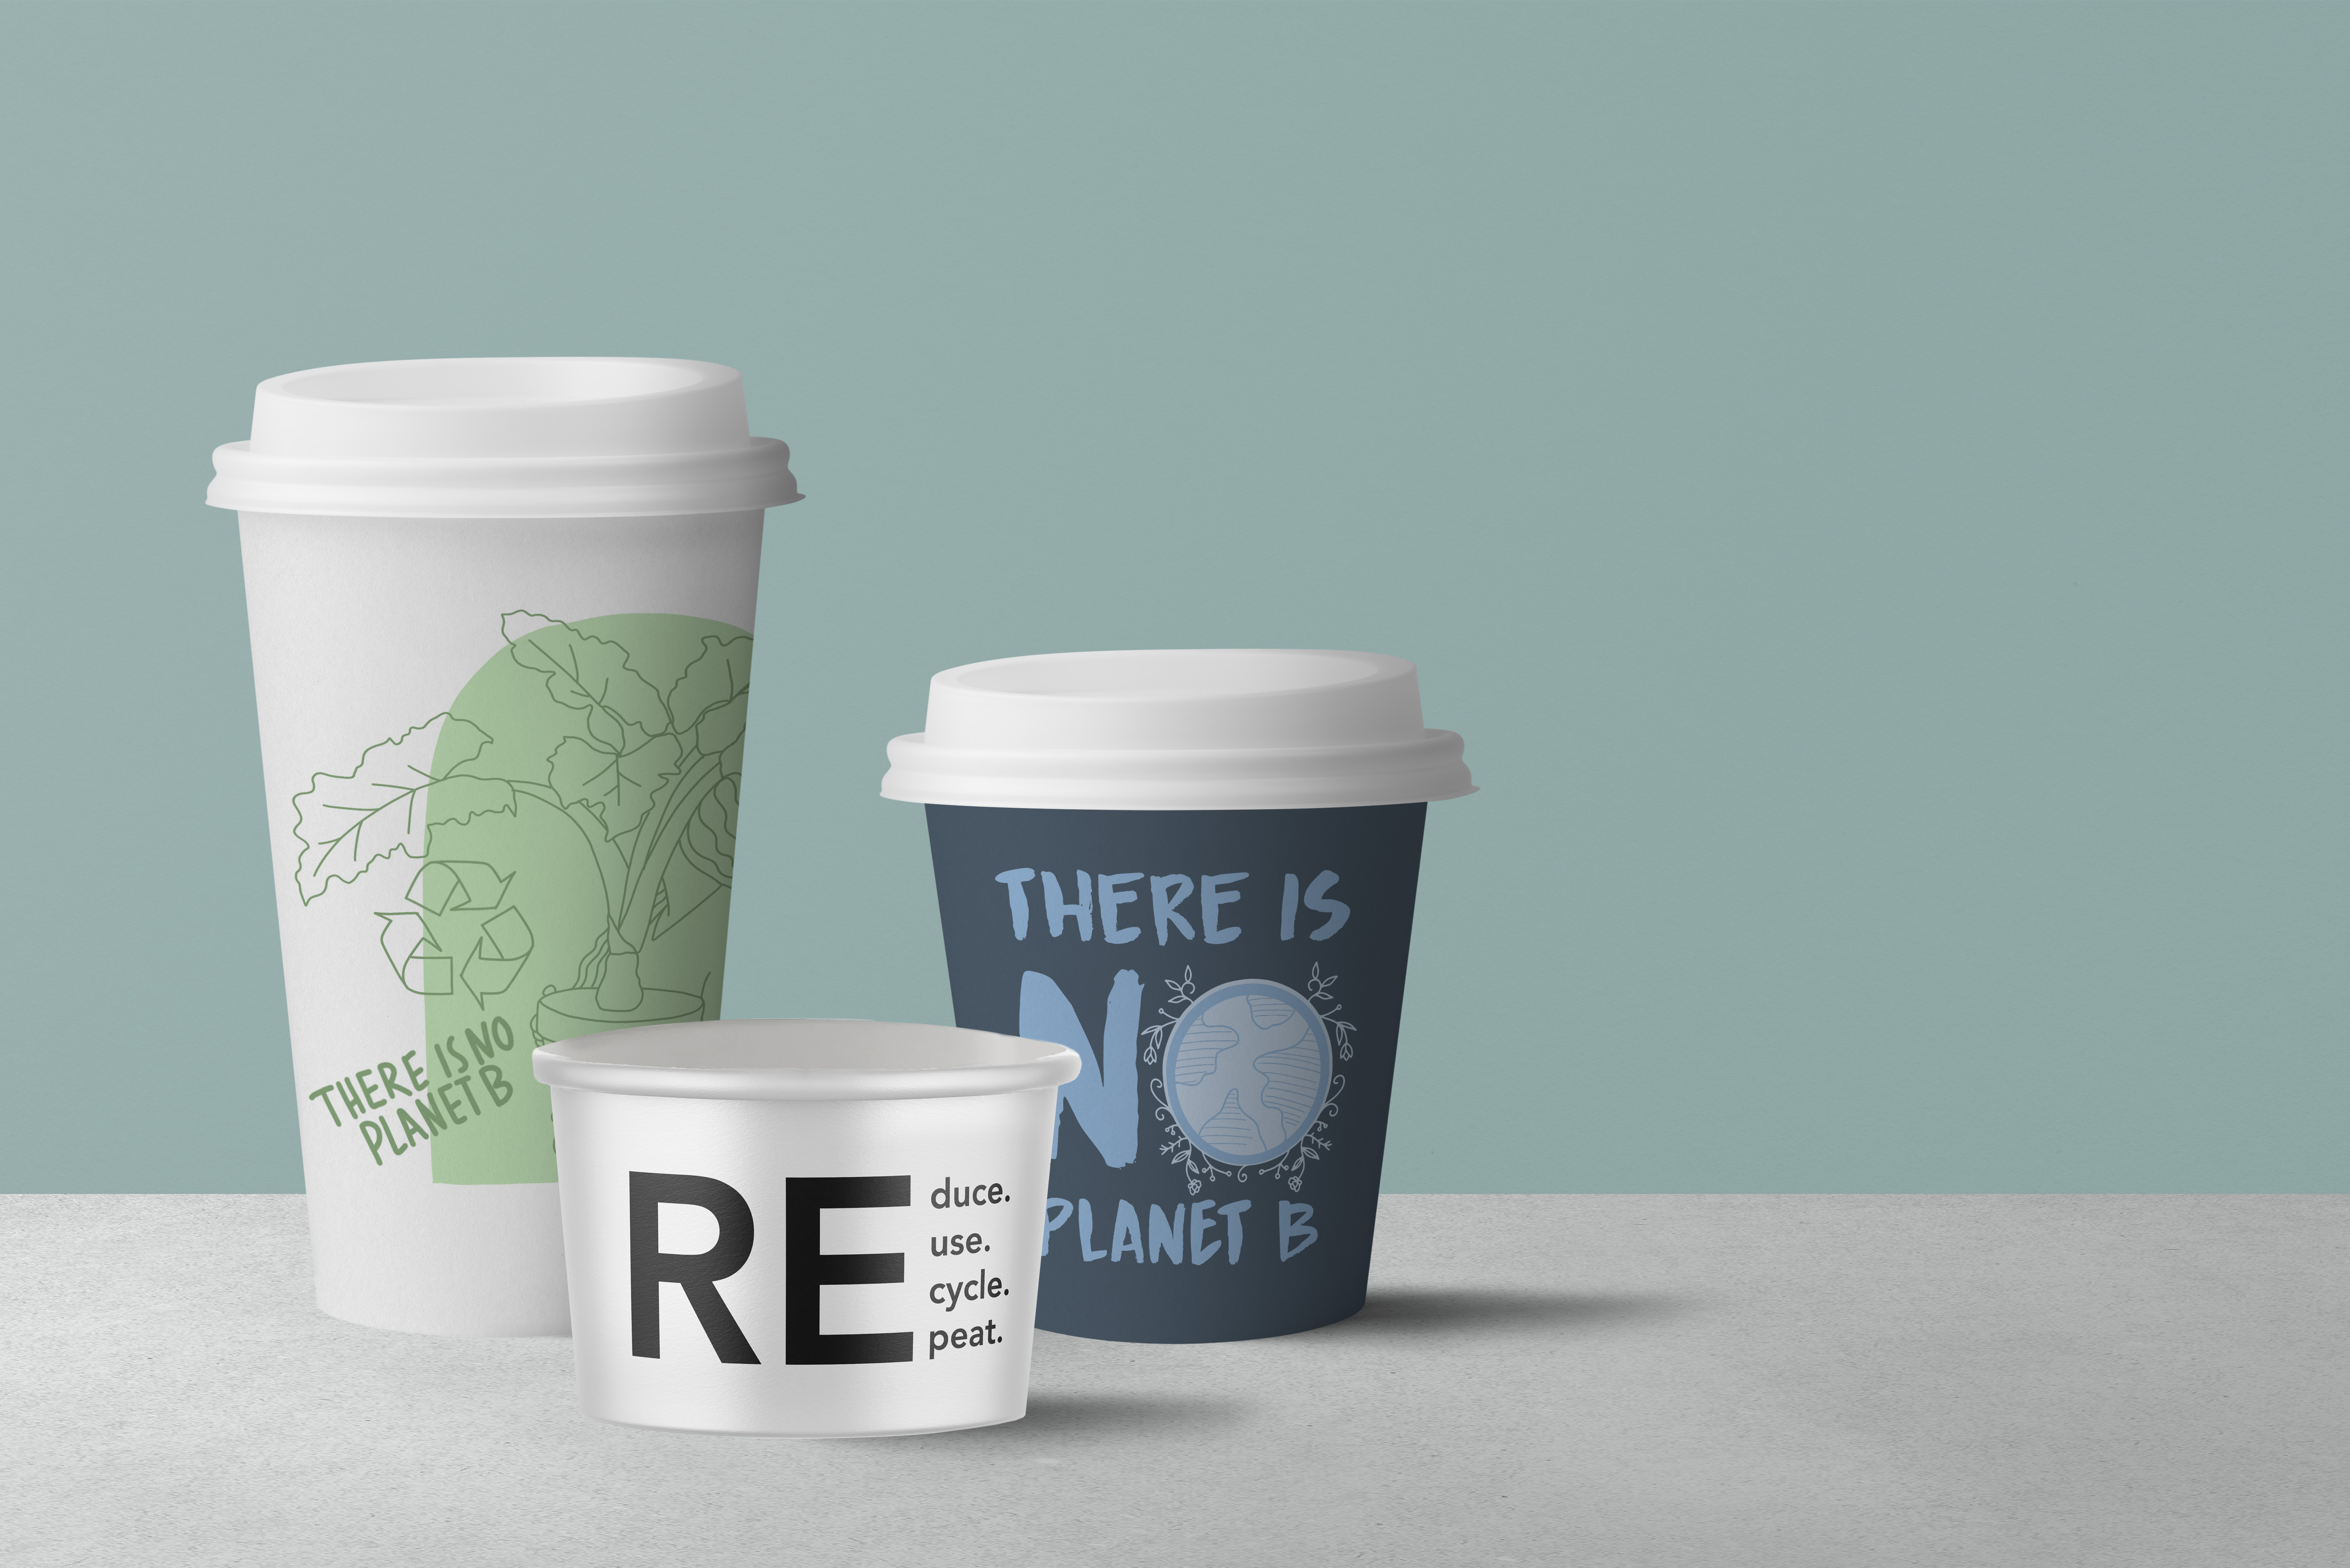 100% recyclable and
Truly sustainable products